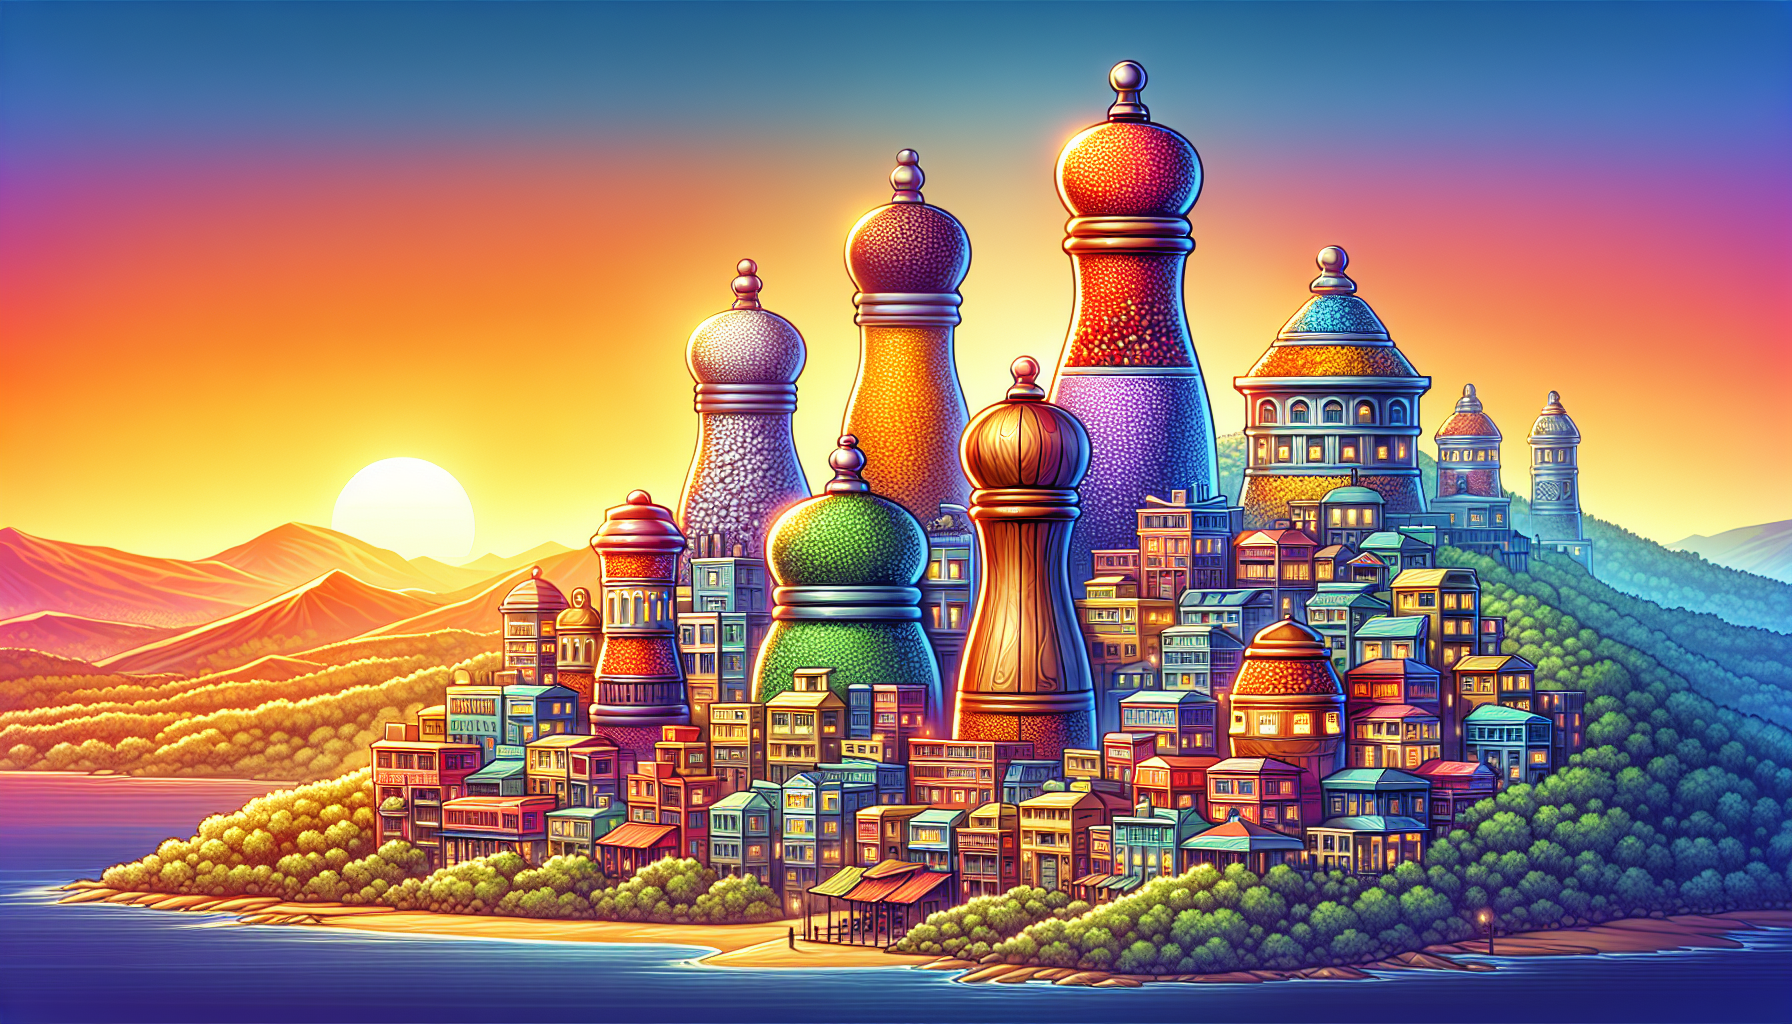 An imaginative digital painting of a hilltop city at sunset, where each building is creatively shaped like different spices and seasoning containers, with salt shakers prominently featured, symbolizin